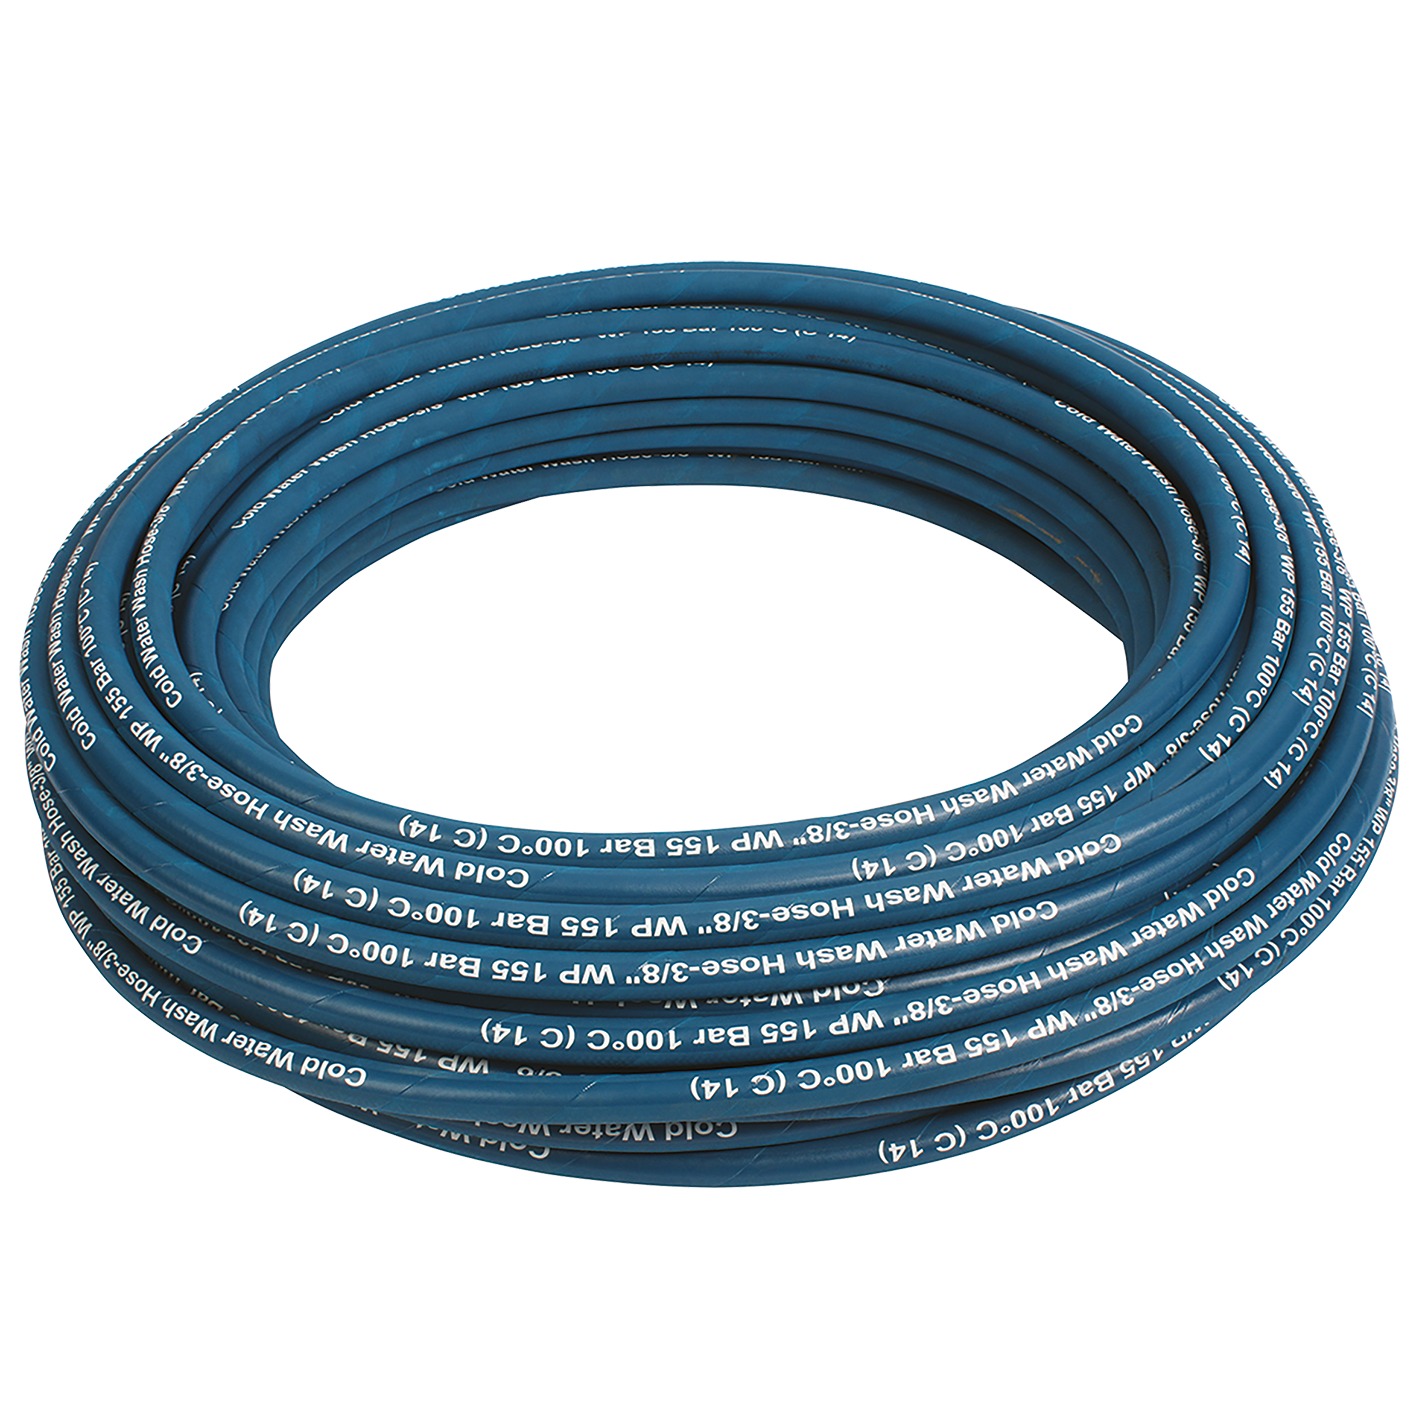 COLD WATER 3/8" R1 BLUE 25M